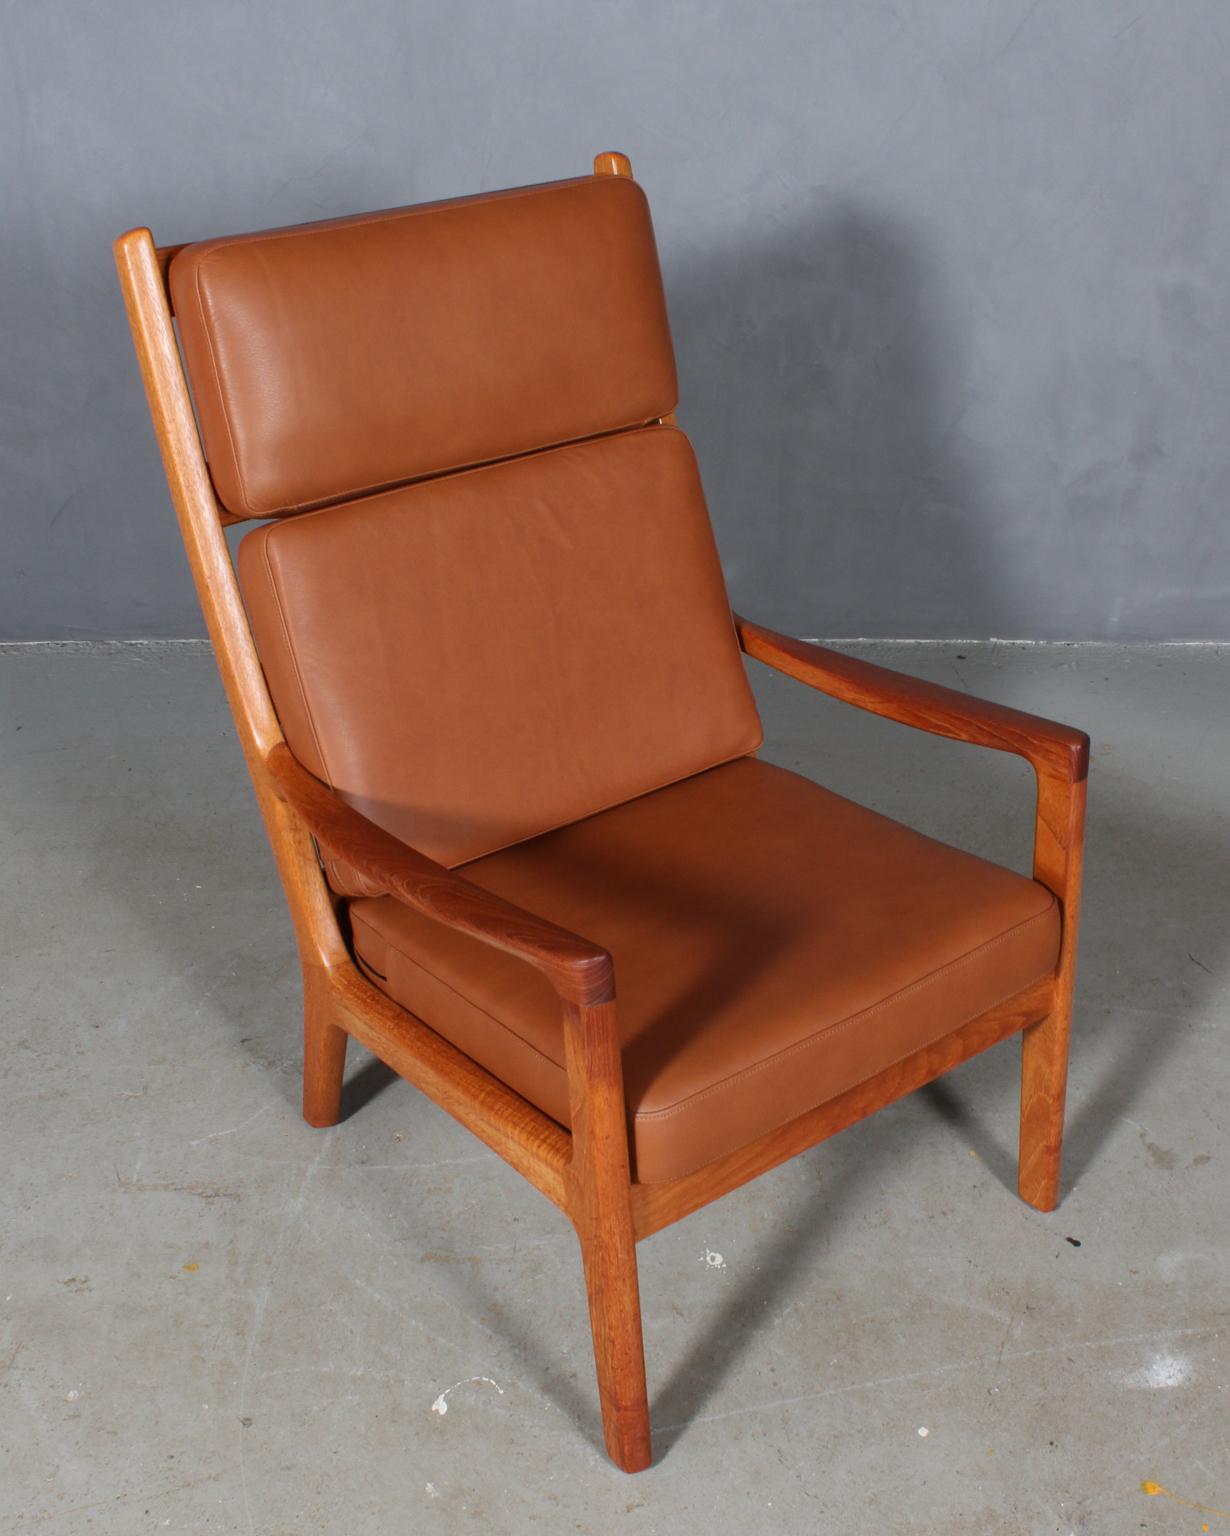 Ole Wanscher lounge new upholstered with tan aniline leather.

Made of solid teak.

Model senator, made by Cado.